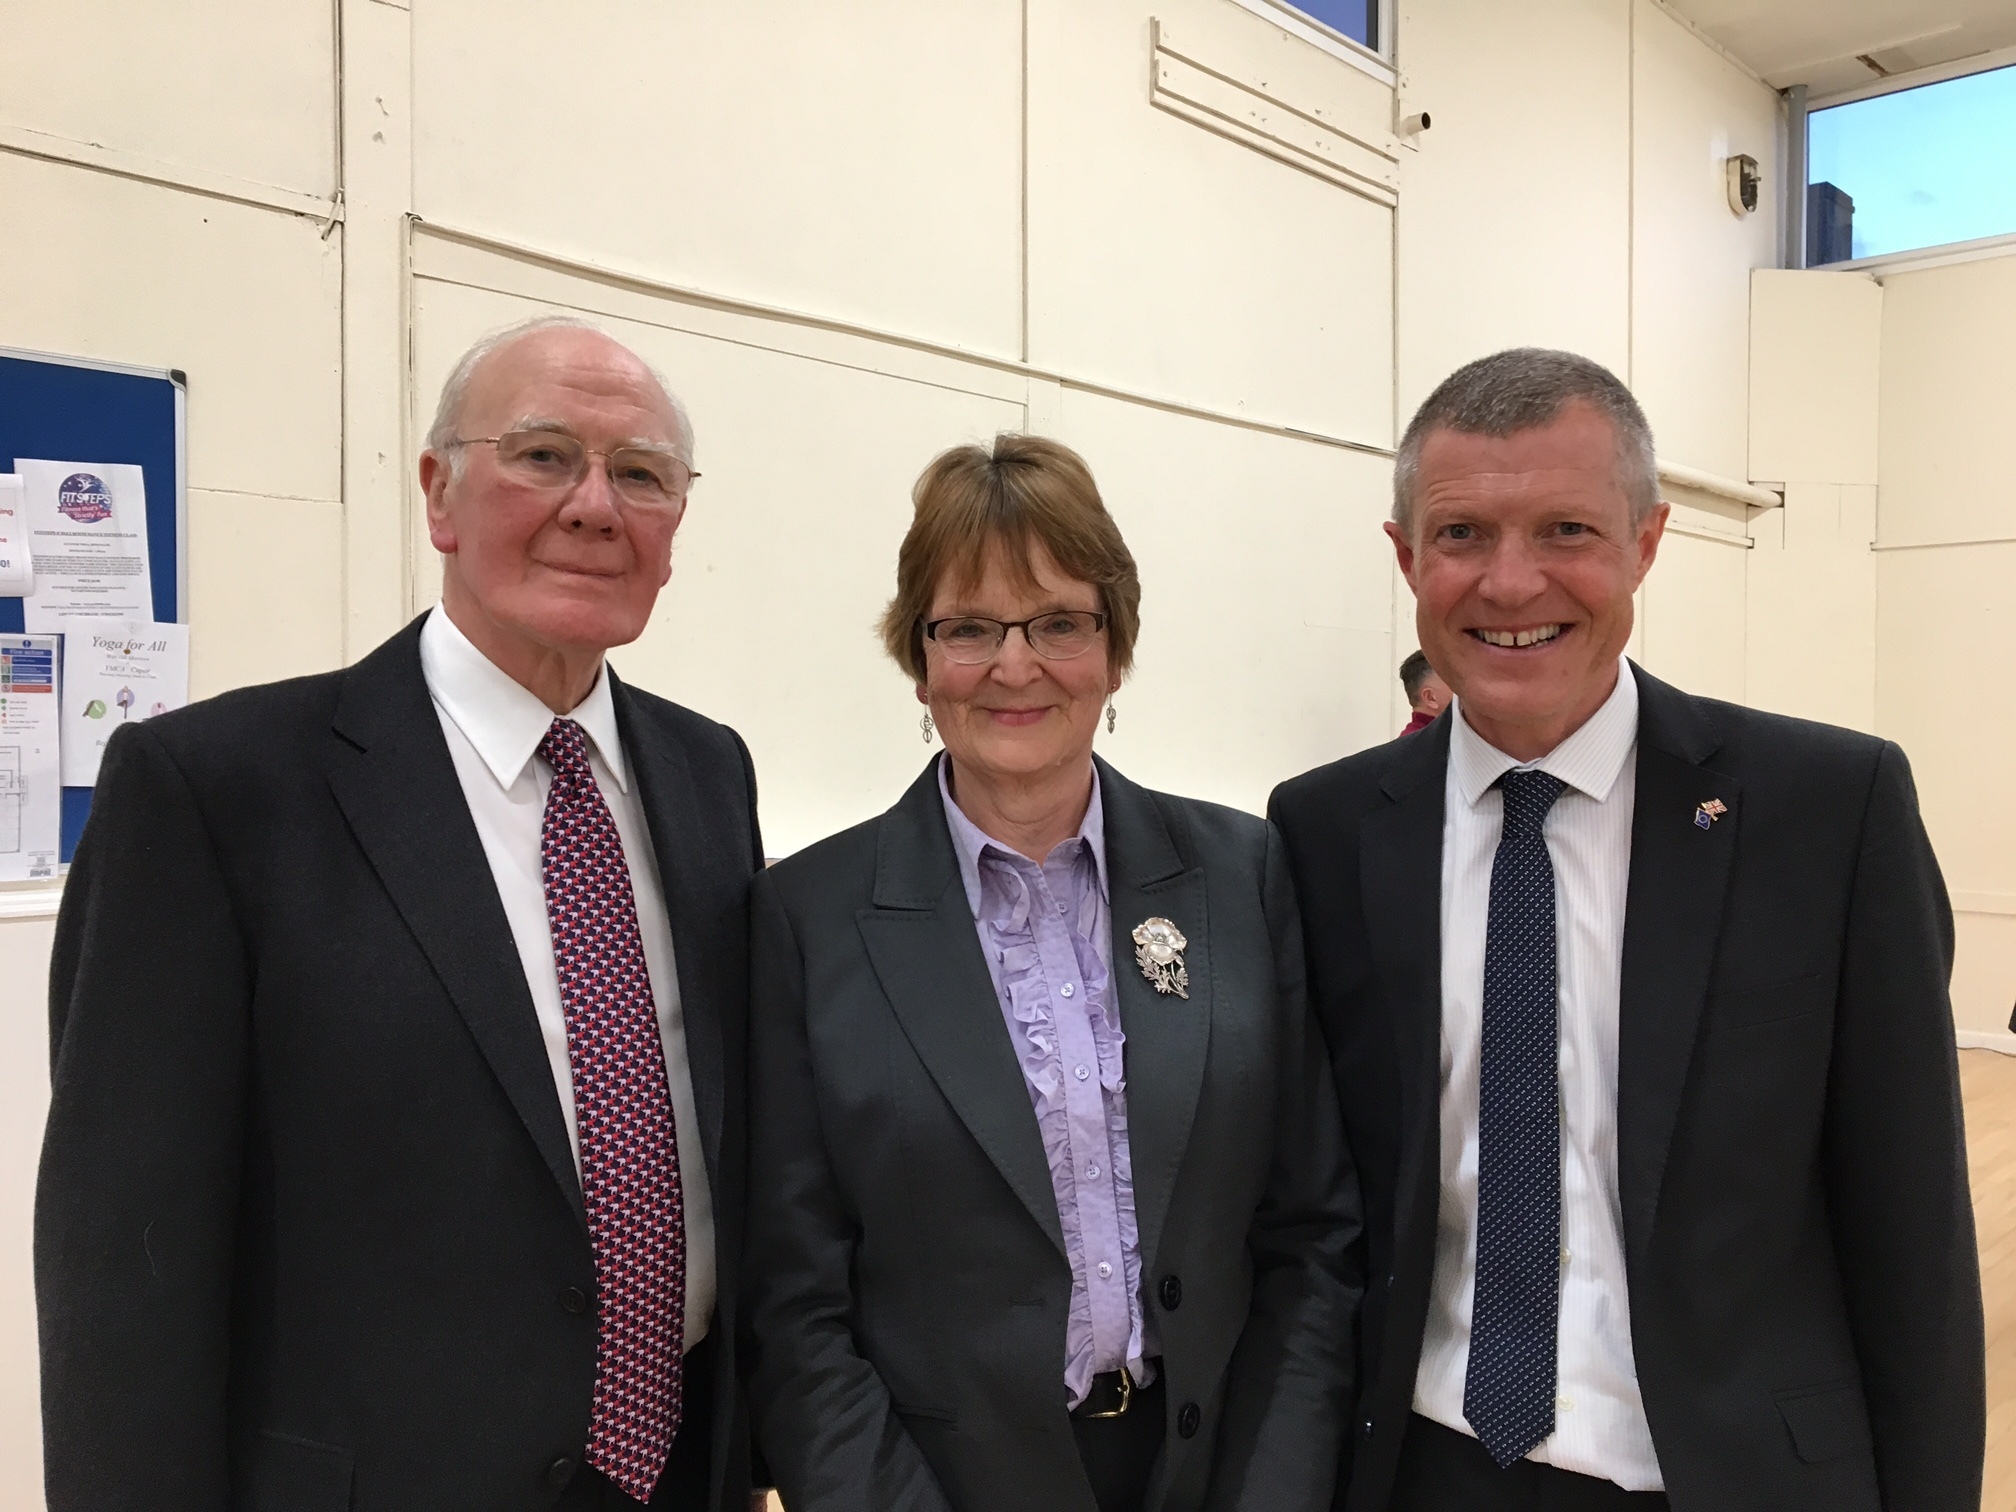 North East Fife Liberal Democrat candidate Elizabeth Riches with Scottish leader Willie Rennie and former North East Fife MP Sir Menzies Campbell